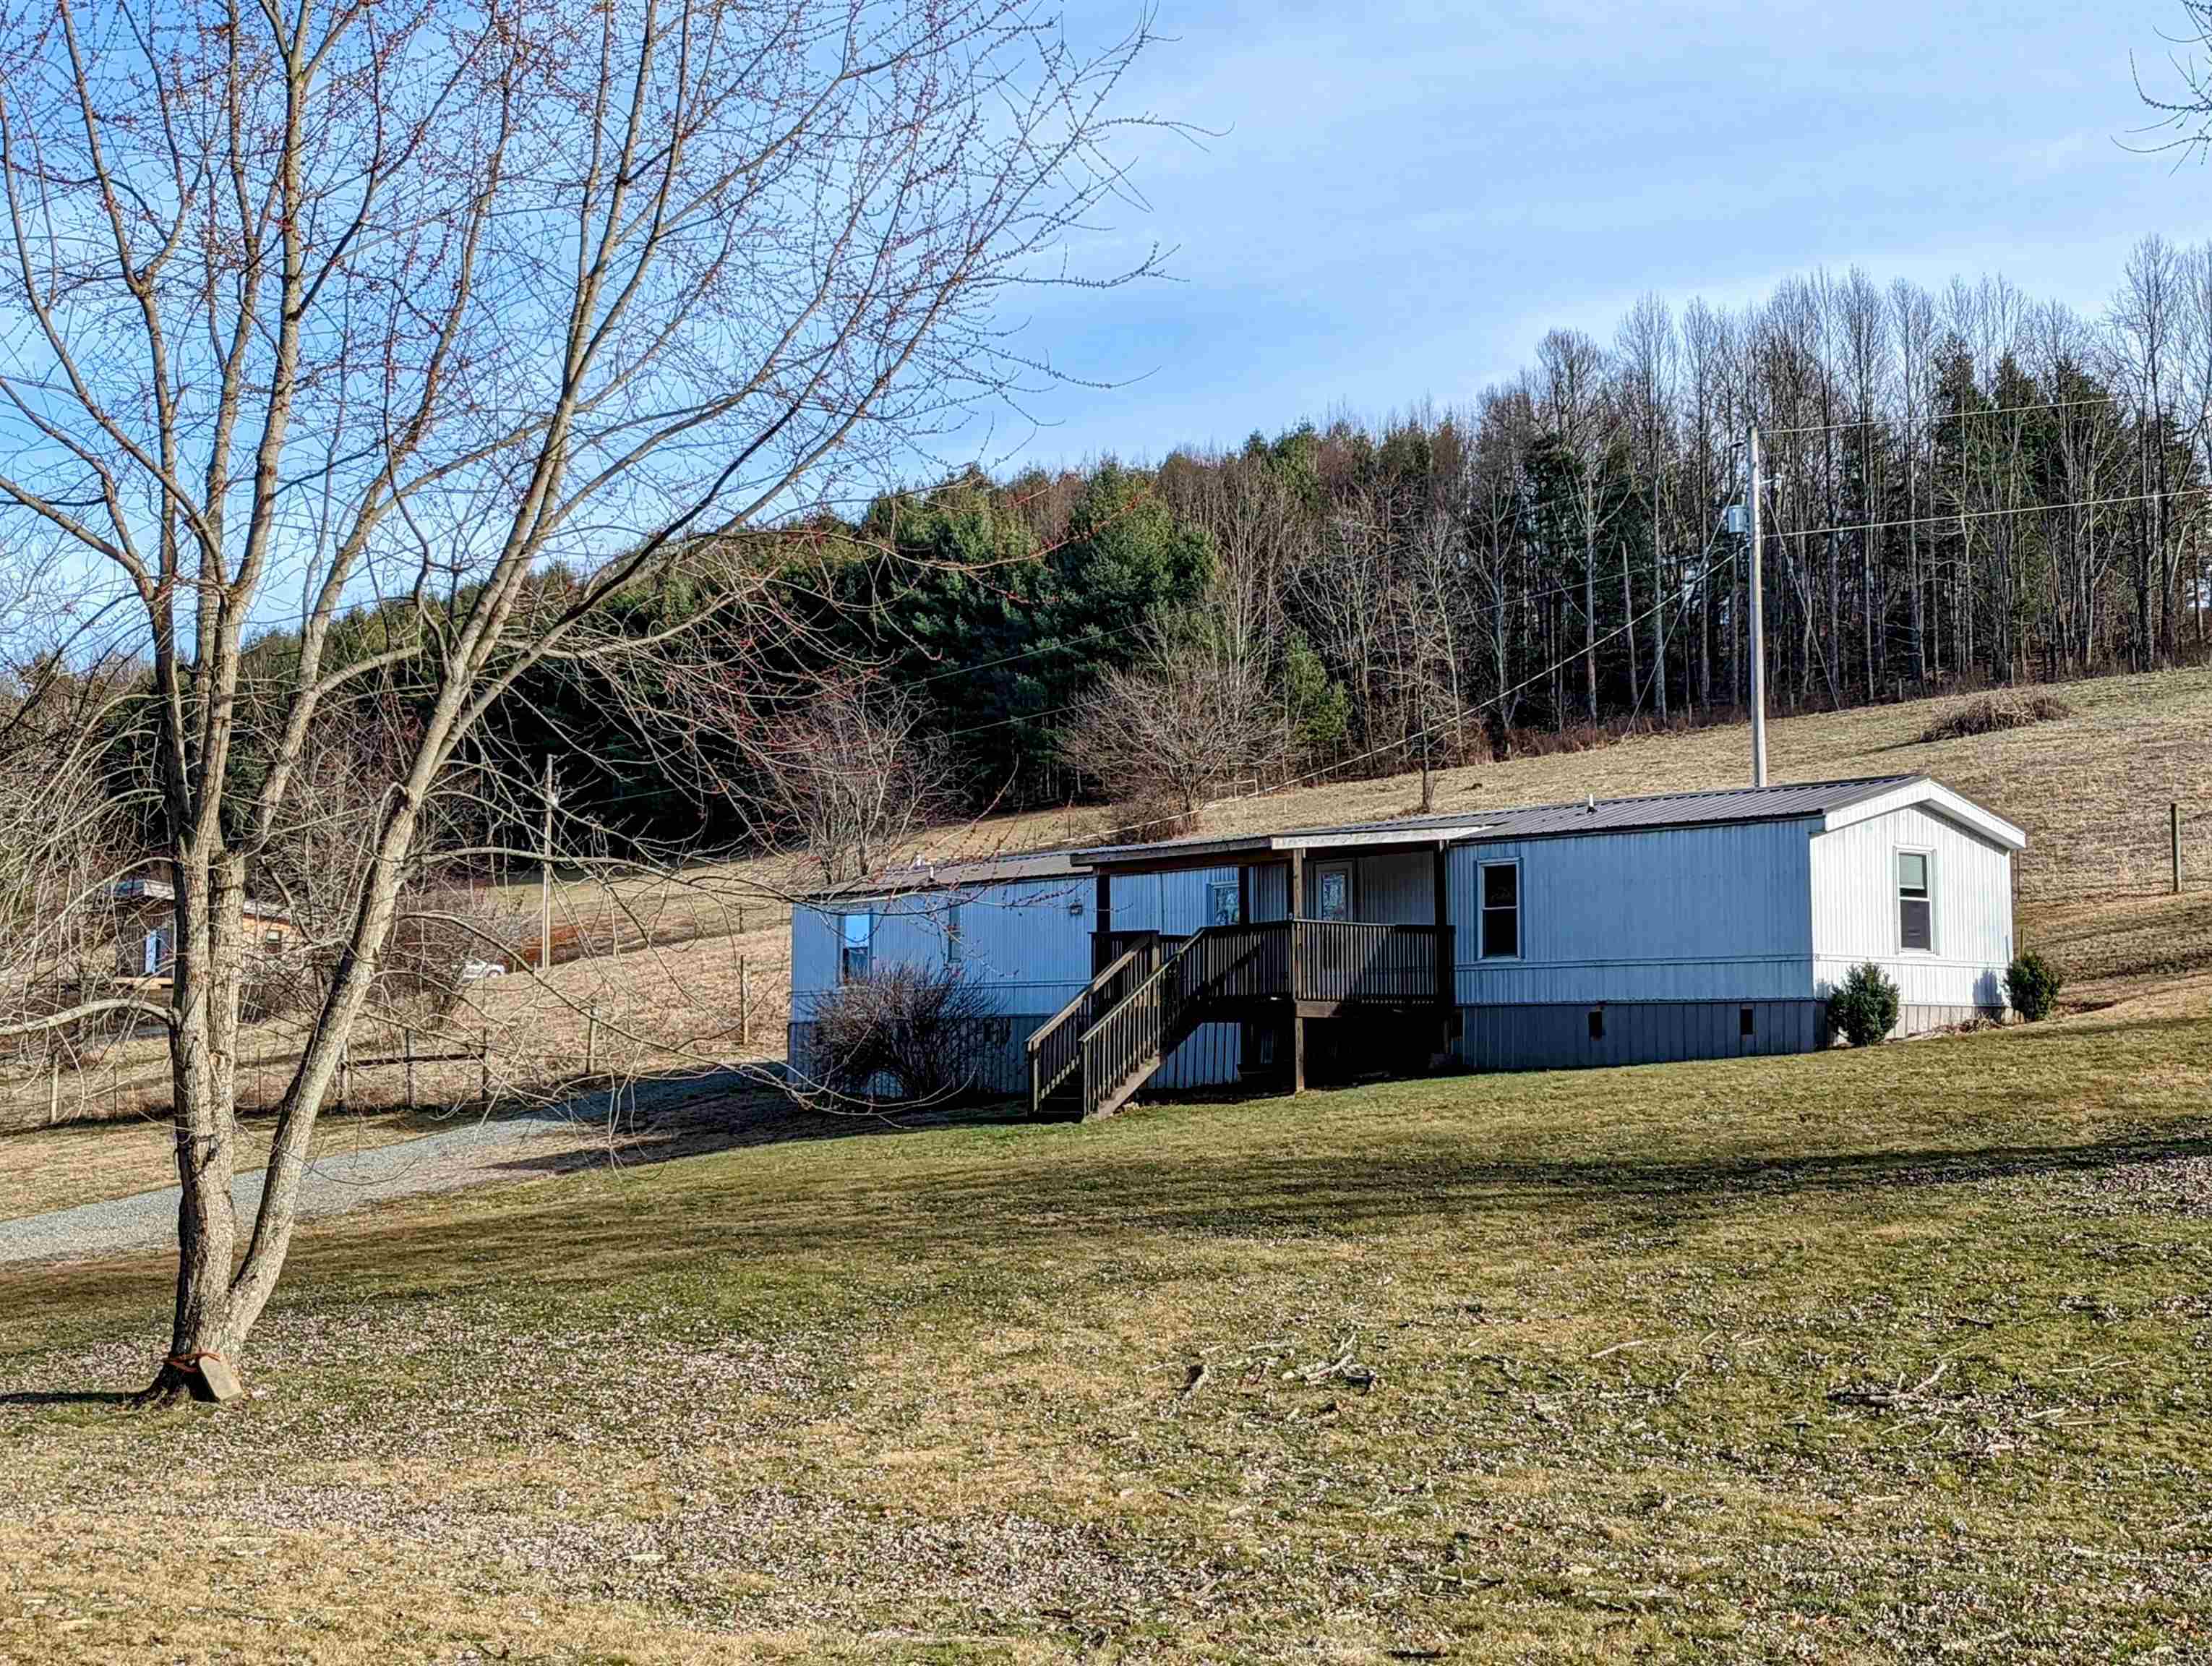 Great little homestead on at least 2 acres located in Wills VA!  This 1994 mobile home has updates and offers 3 BDR, 2 BTH layout.  A small spring fed pond on site with a small fenced area for livestock.  No restrictions and plenty of room for your garden!  Currently the property is on a larger parcel but will be sold with at least 2 acres.  Prior to closing the seller will have the subdivide complete.  Property is served by a private well and septic all of which are on the property.  Call today to check out this great little property!